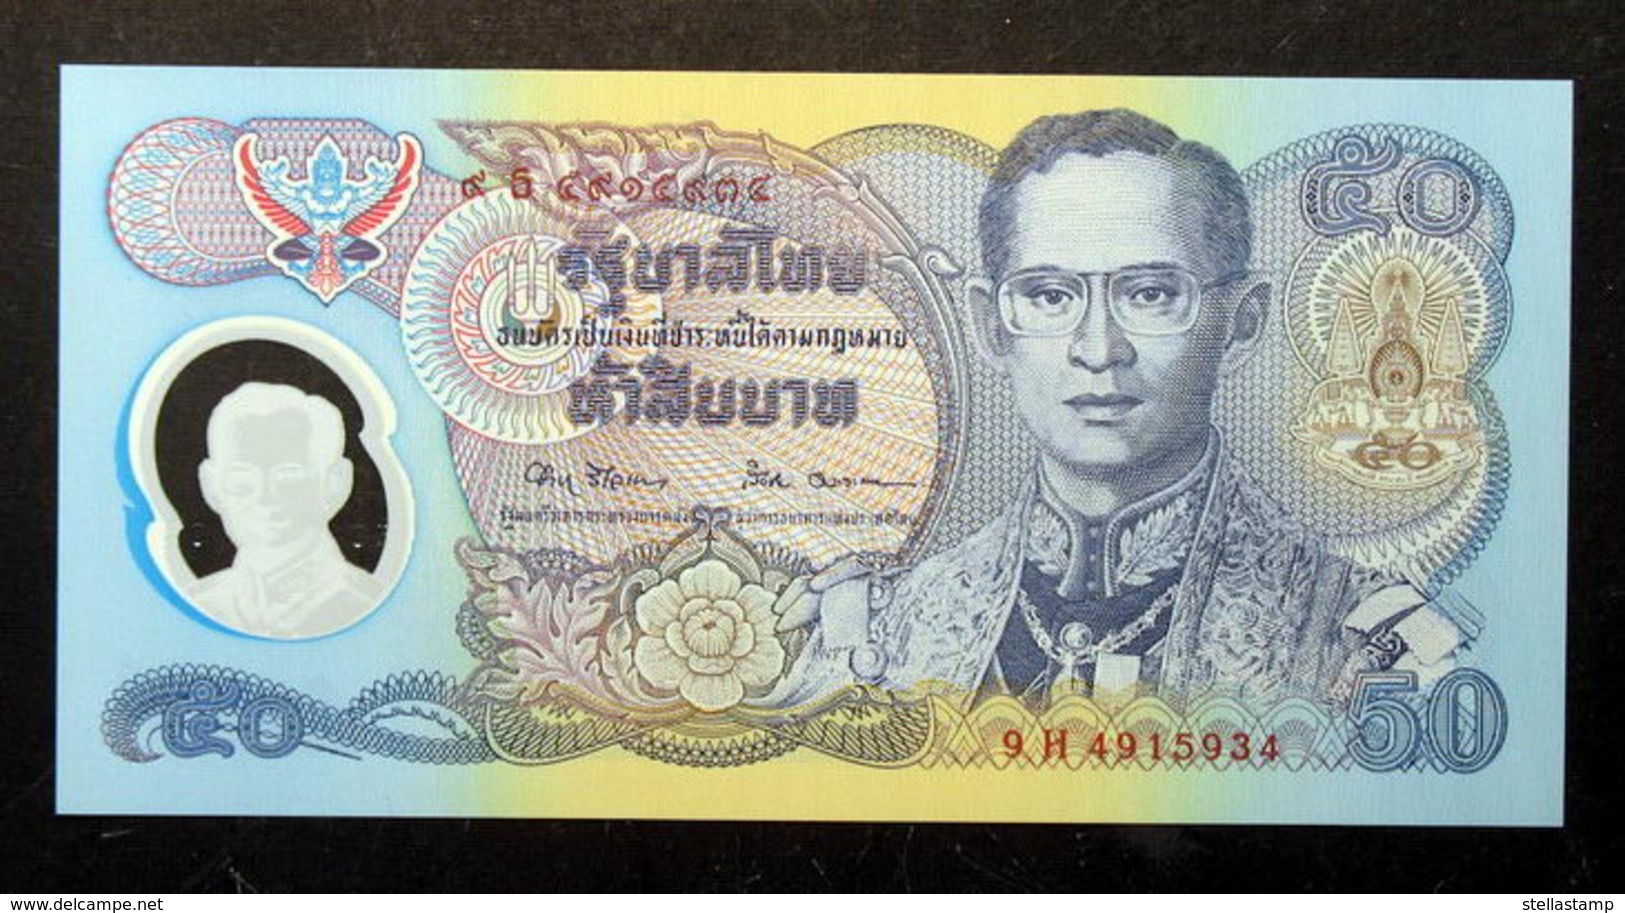 Thailand Banknote 50 Baht 1996 Golden Jubilee HM Accession To Throne Polymer P#99 SIGN#67 - Tailandia